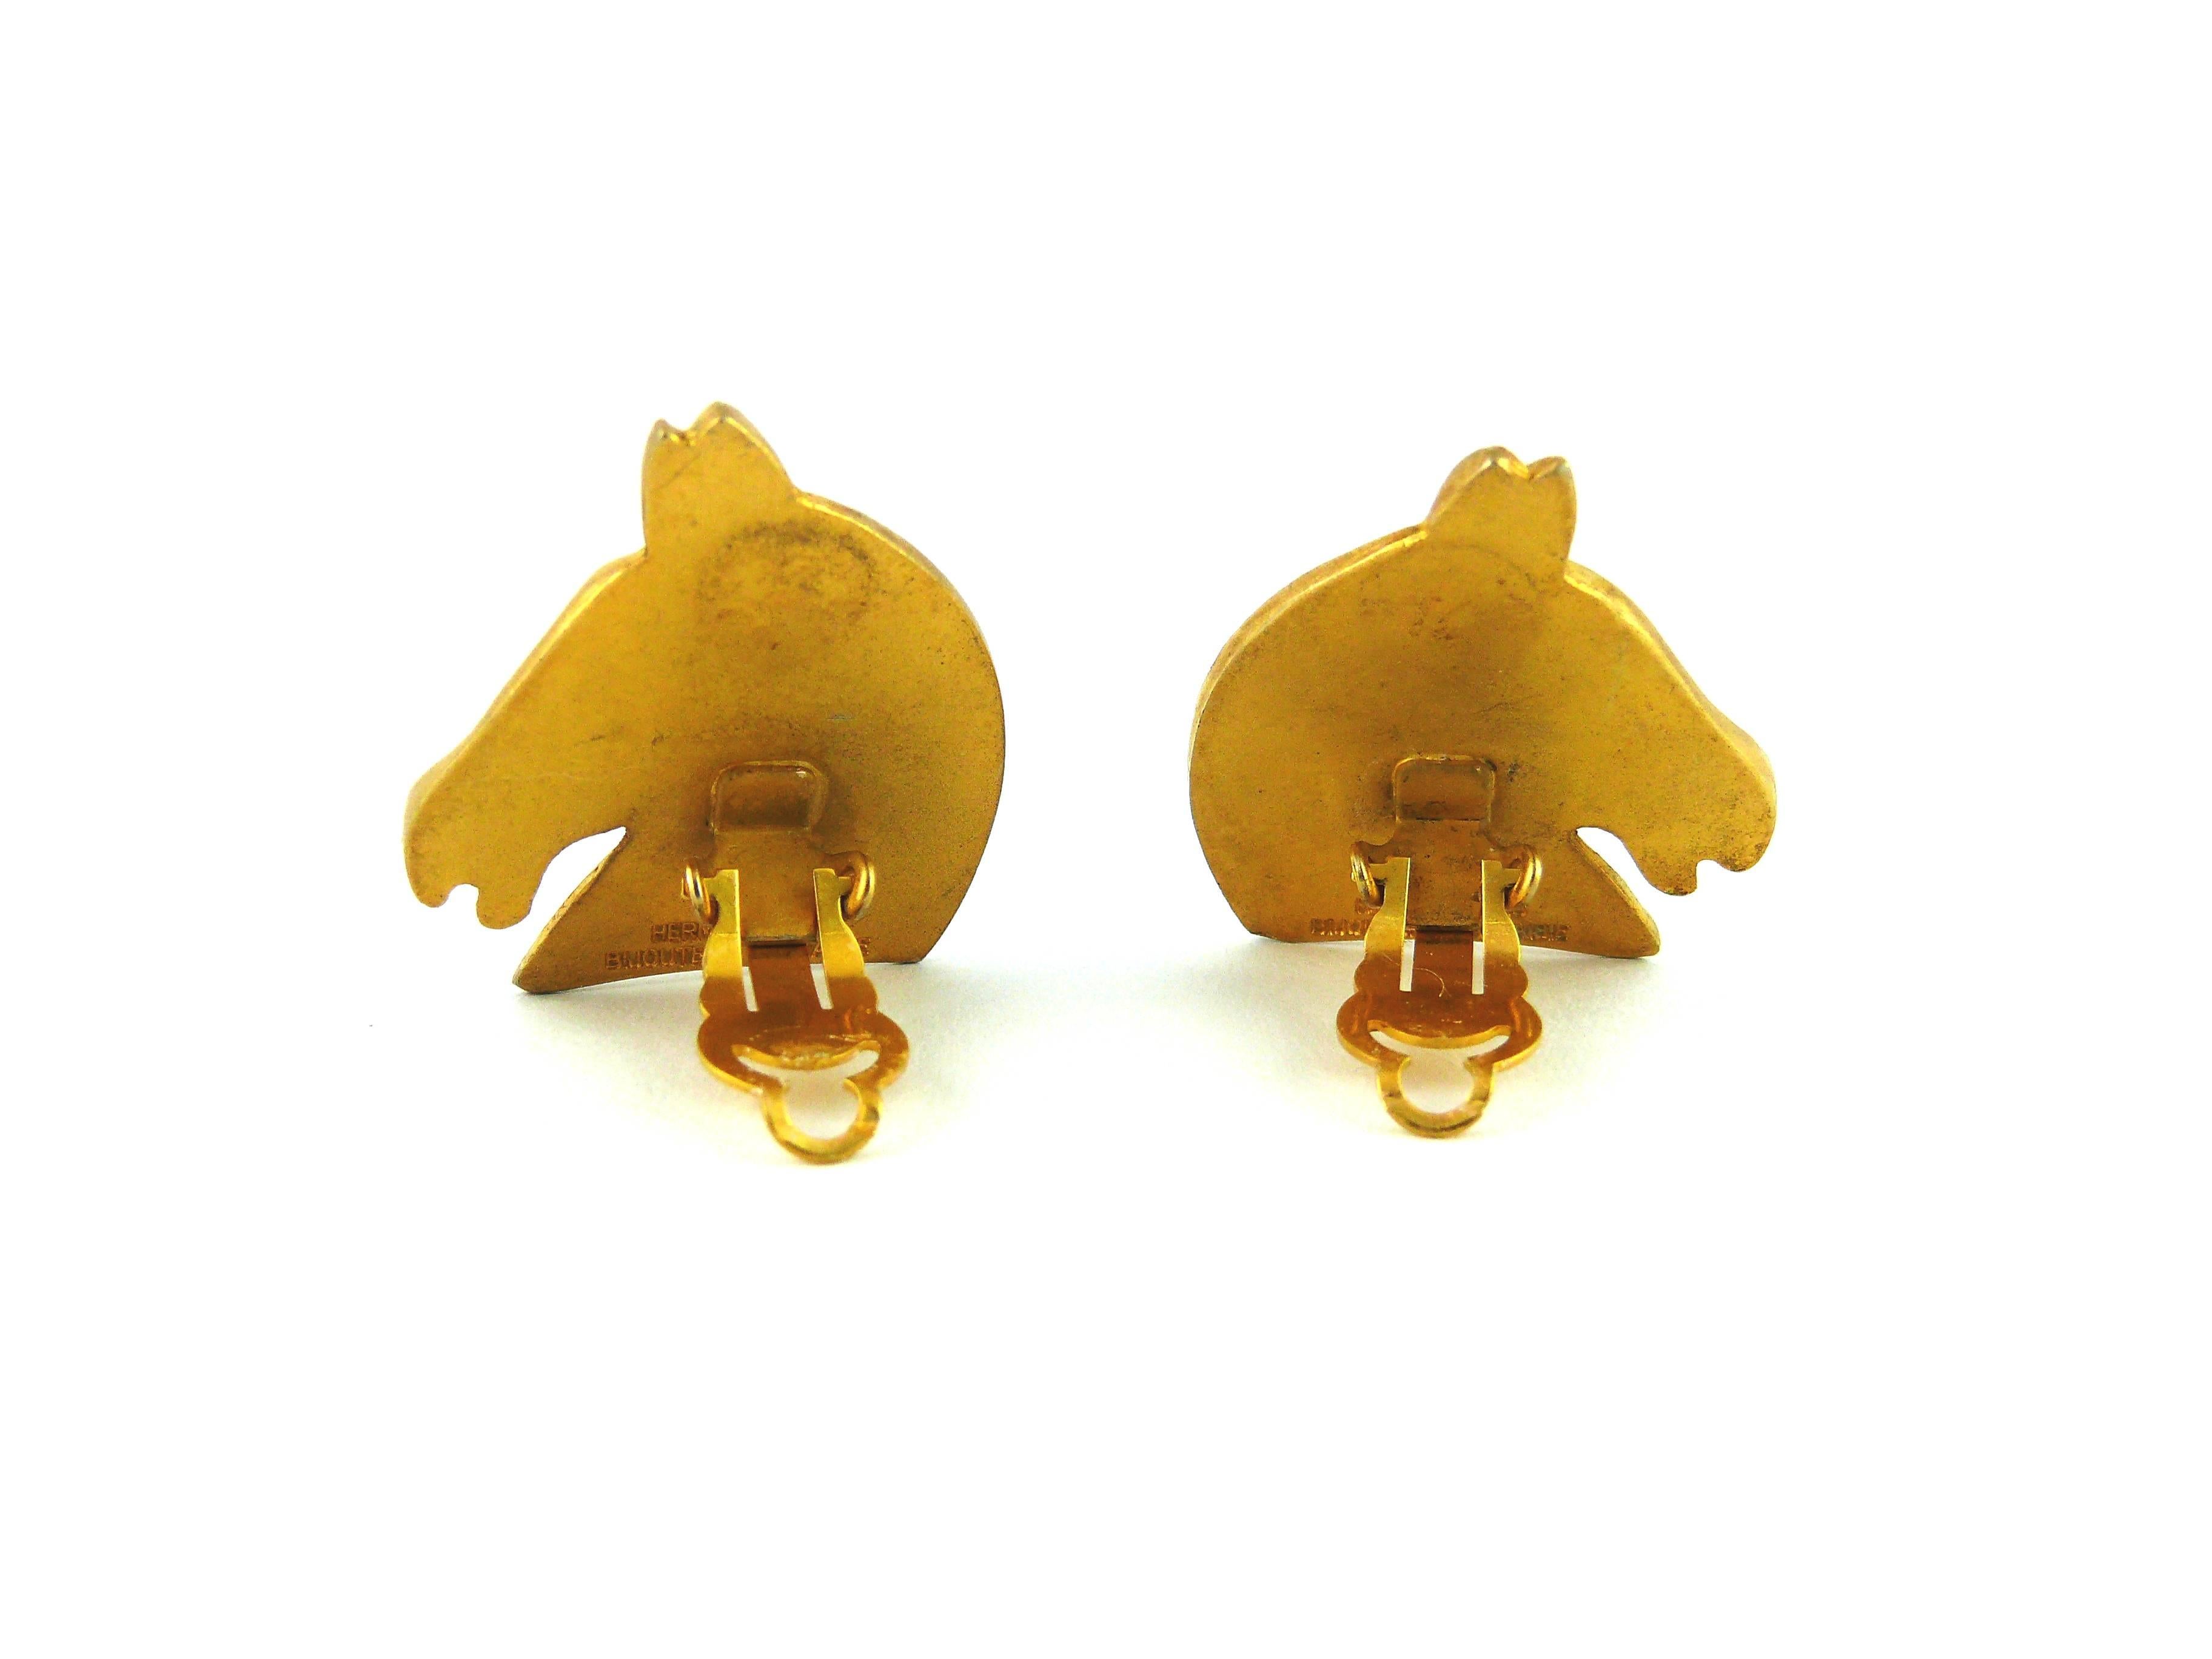 HERMES Paris vintage gold tone iconic clip on earrings featuring a horse head.

Embossed Hermes Paris Bijouterie Fantaisie.

Note
As a buyer, you are fully responsible for customs duties, other local taxes and any administrative procedures